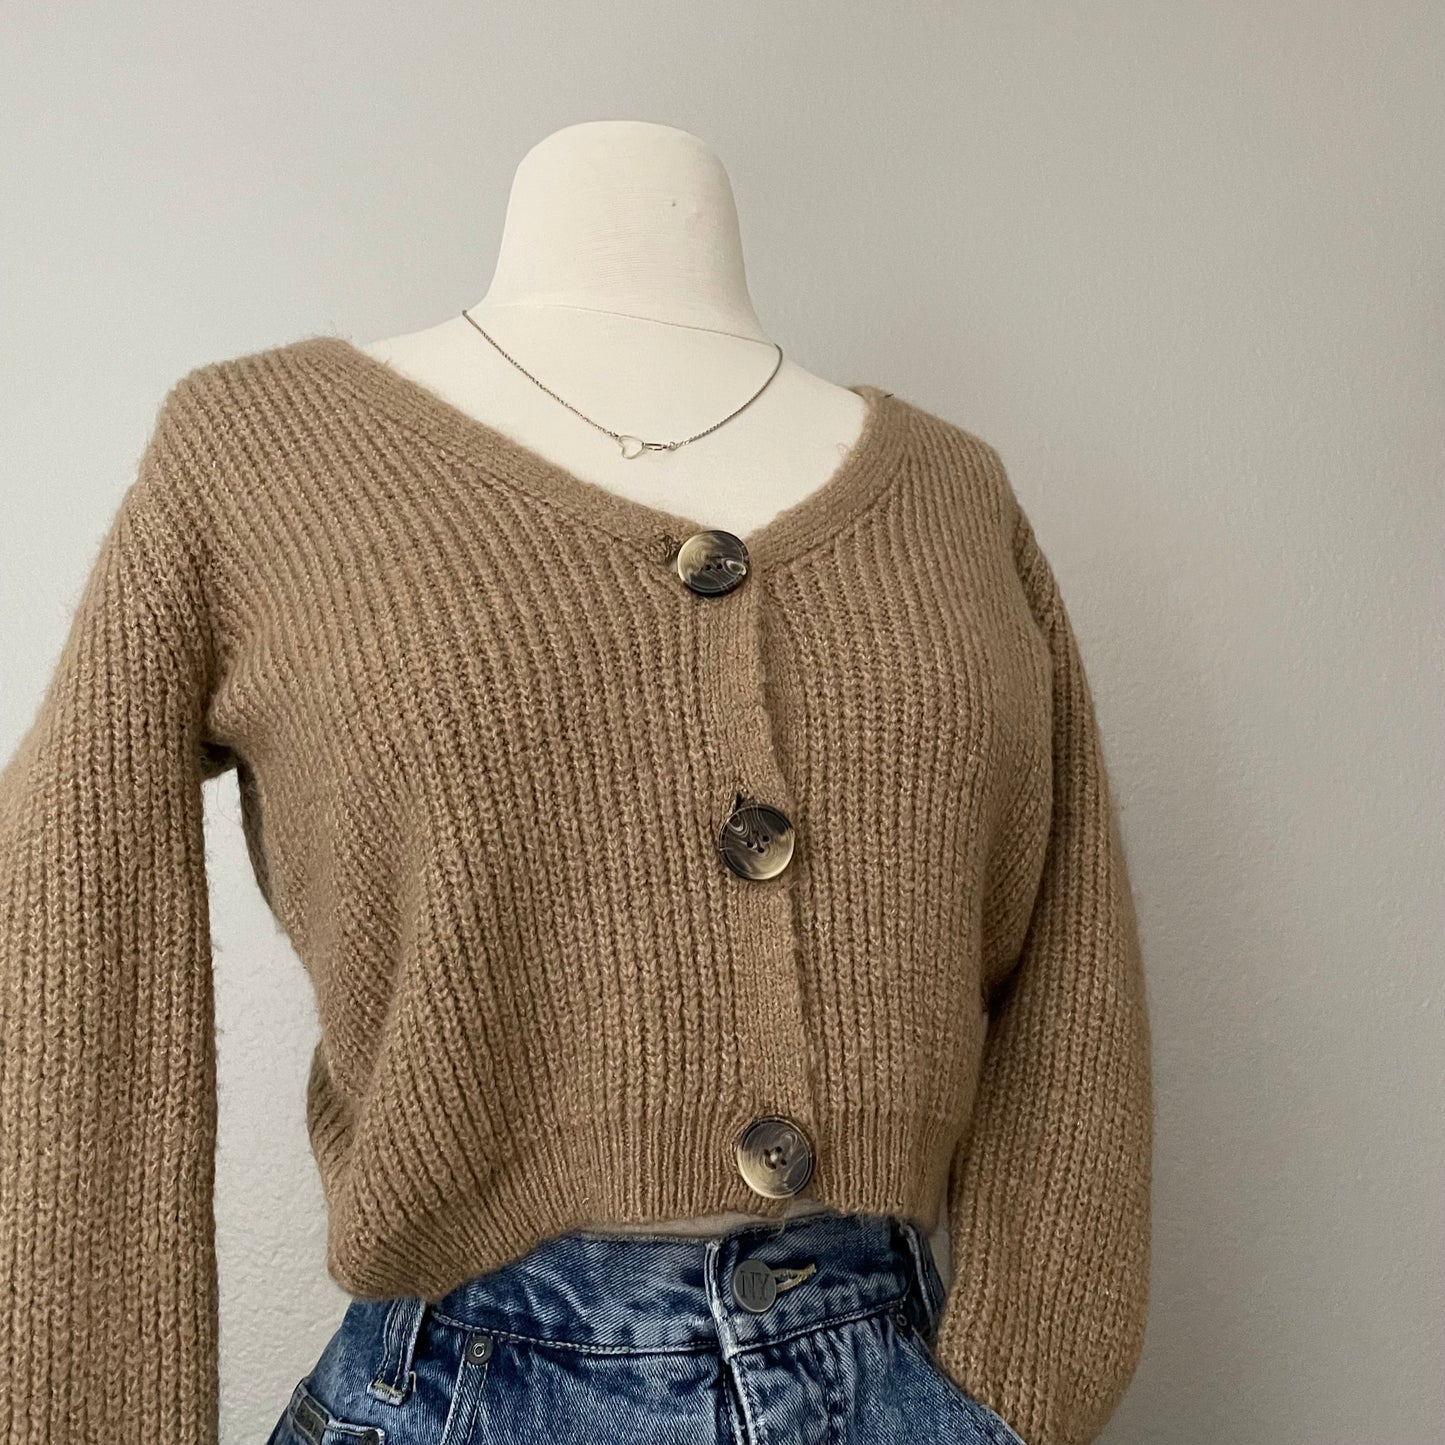 Cropped Knit Neutral Cardigan Sweater (10)